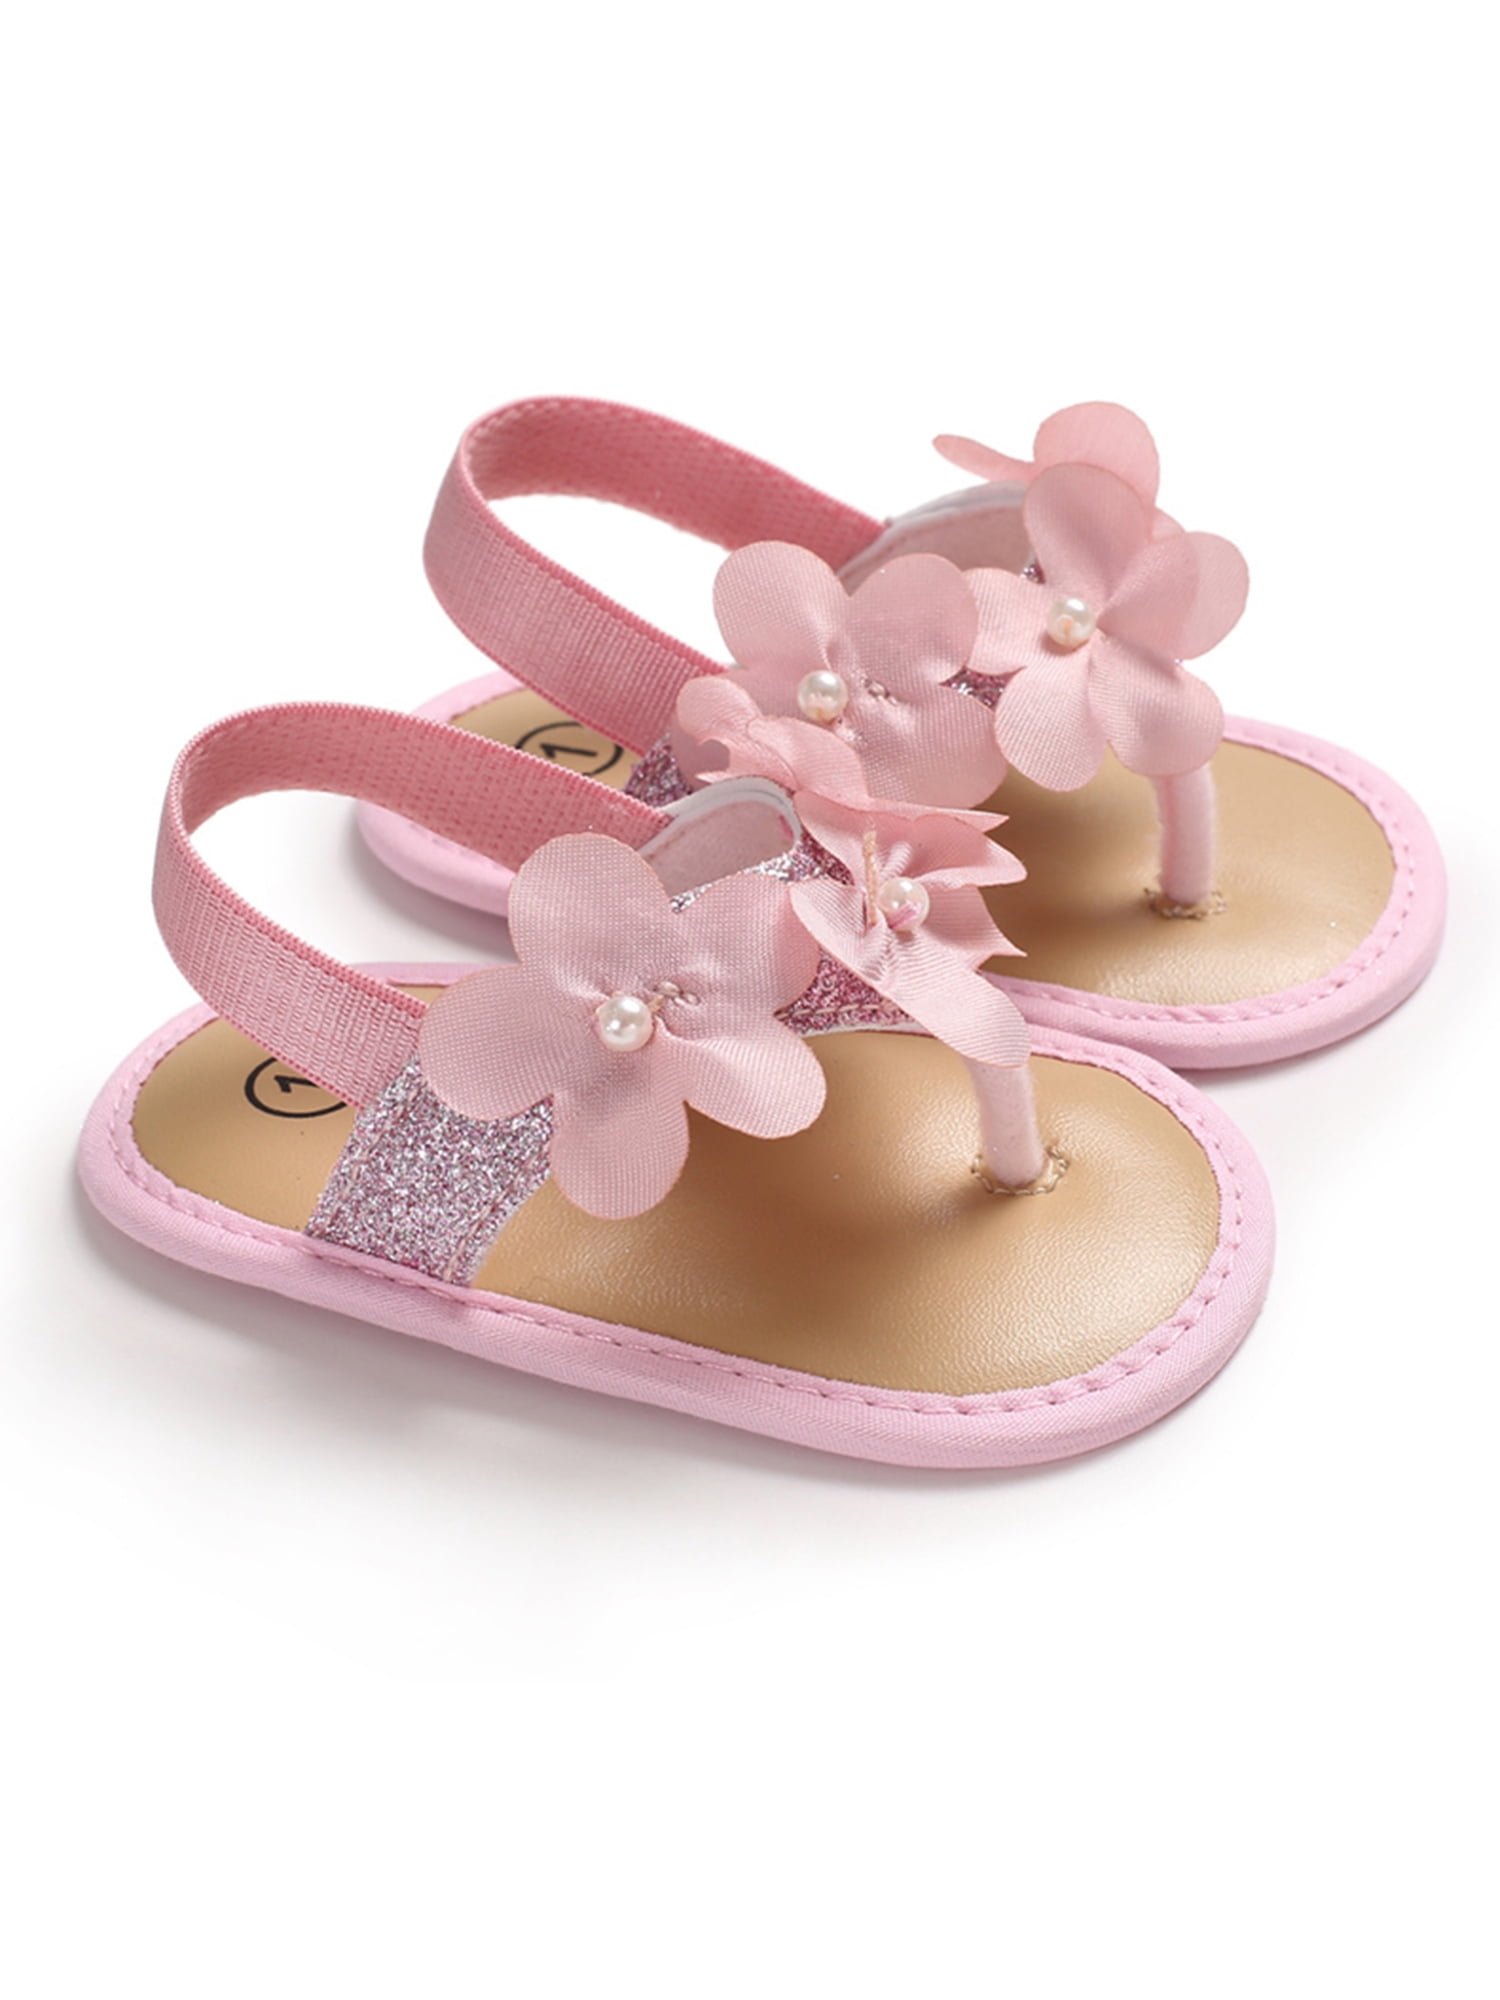 Details about   HOGAN JUNIOR H434 BABY GIRL SANDALS SHOES CASUAL FREE TIME HXT4340BJ70HB94399 